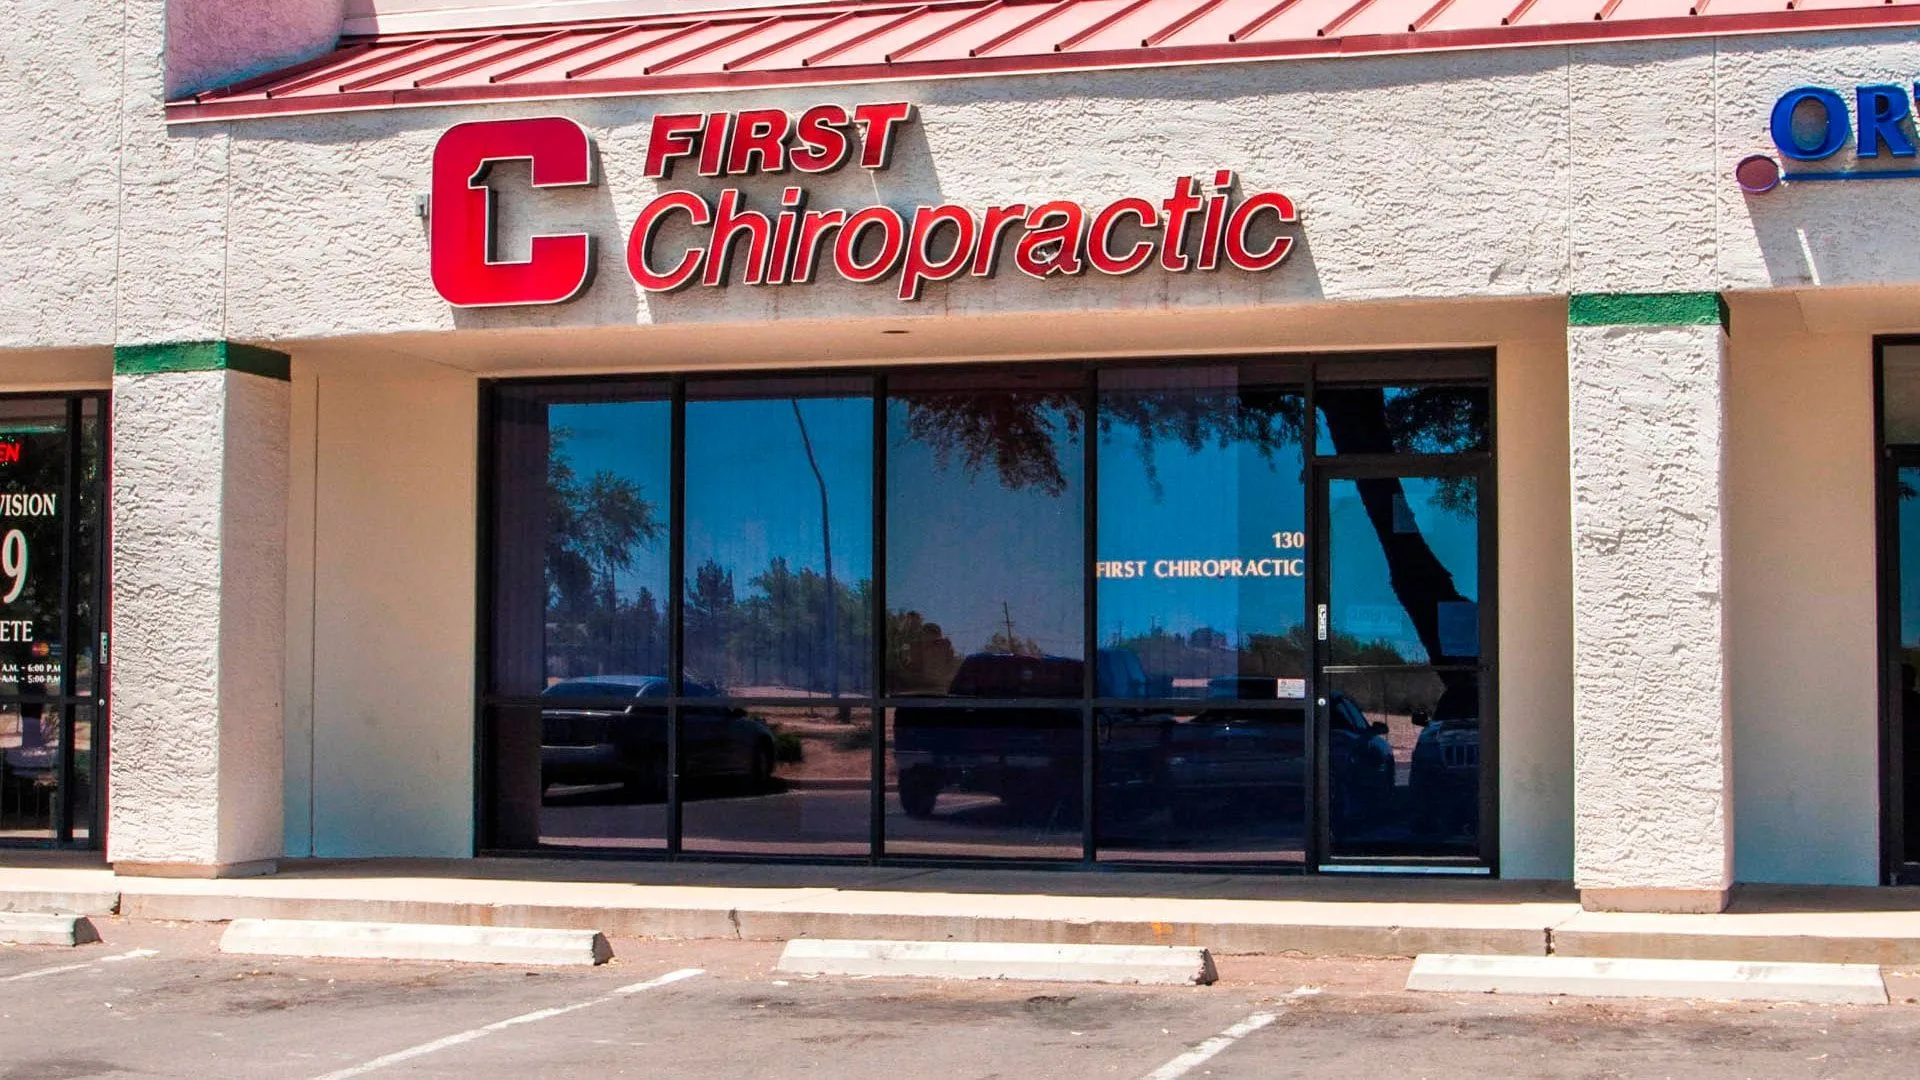 First Chiropractic of Tucson on East Valencia Road